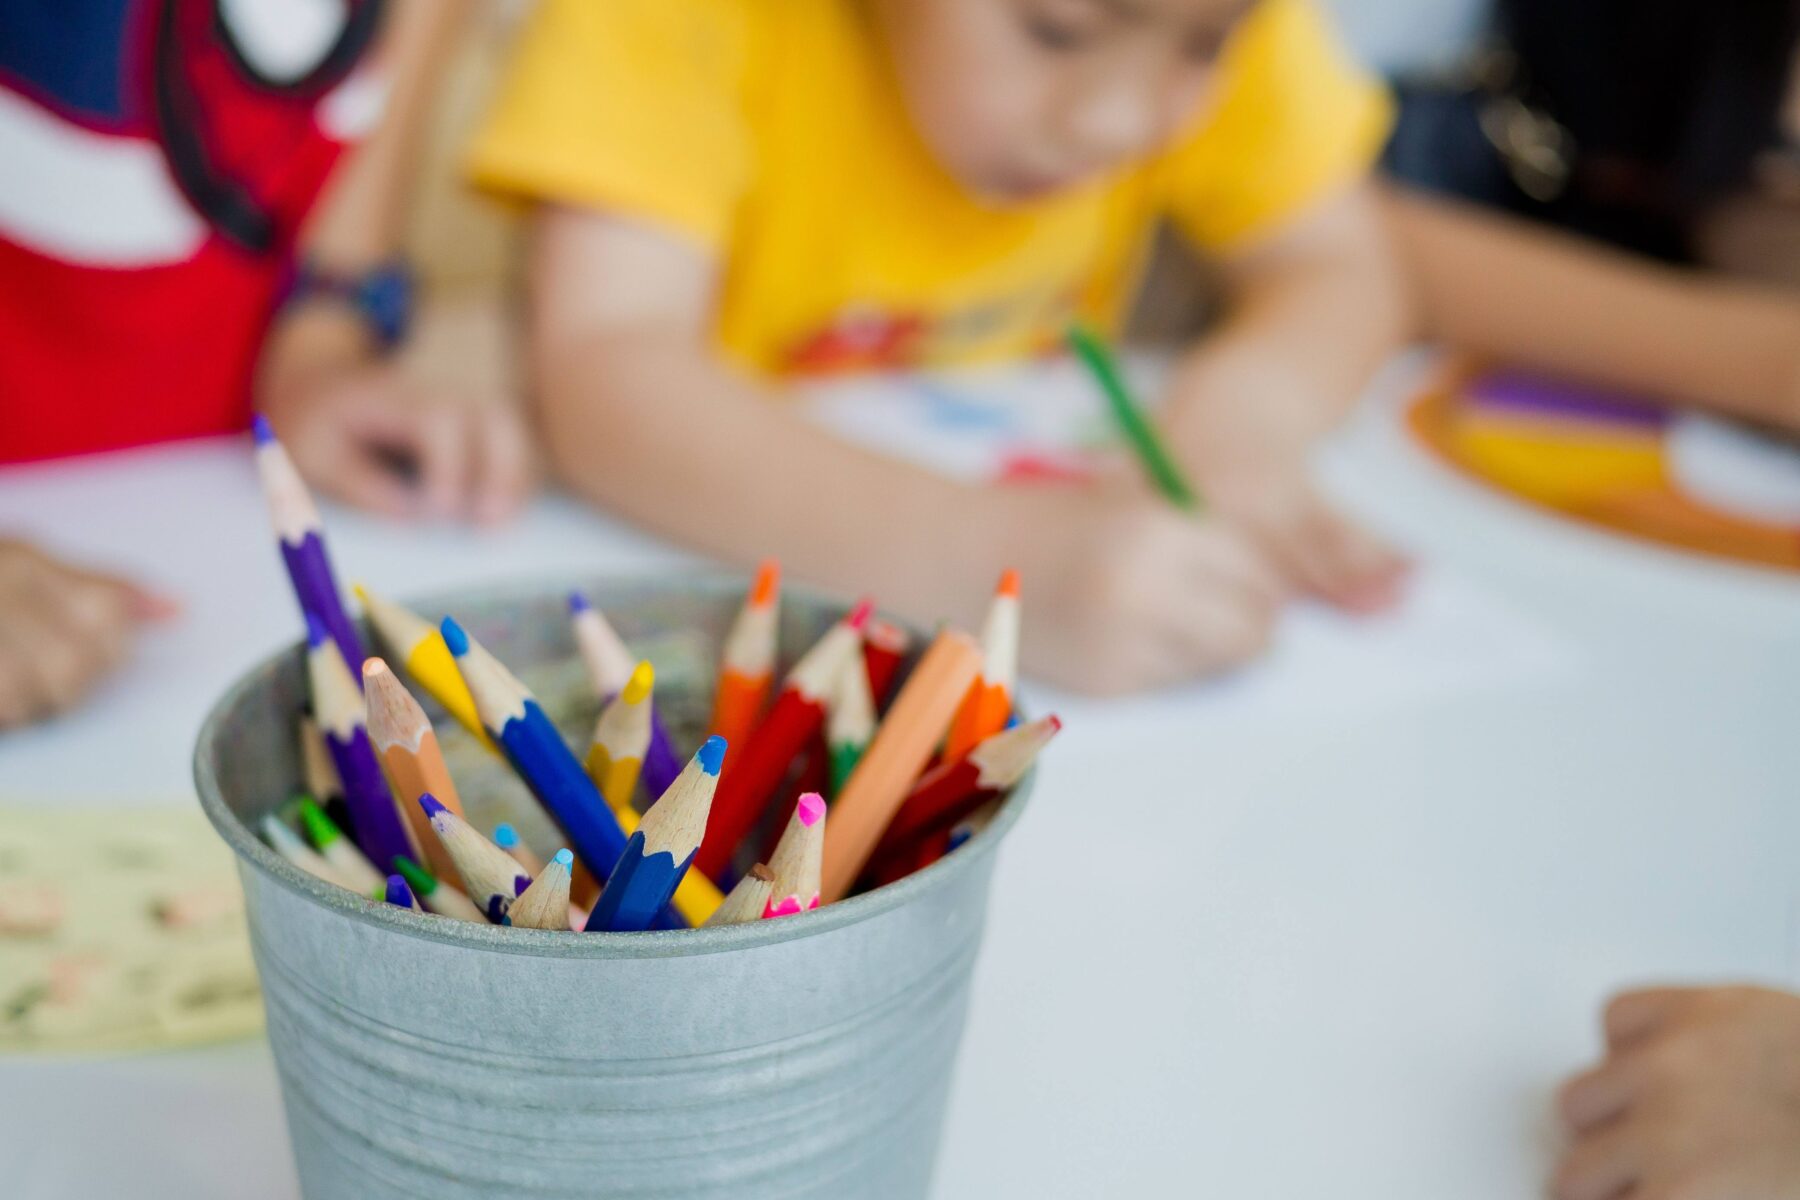 Kids coloring at a table with a bucket of colored pencils in the middle